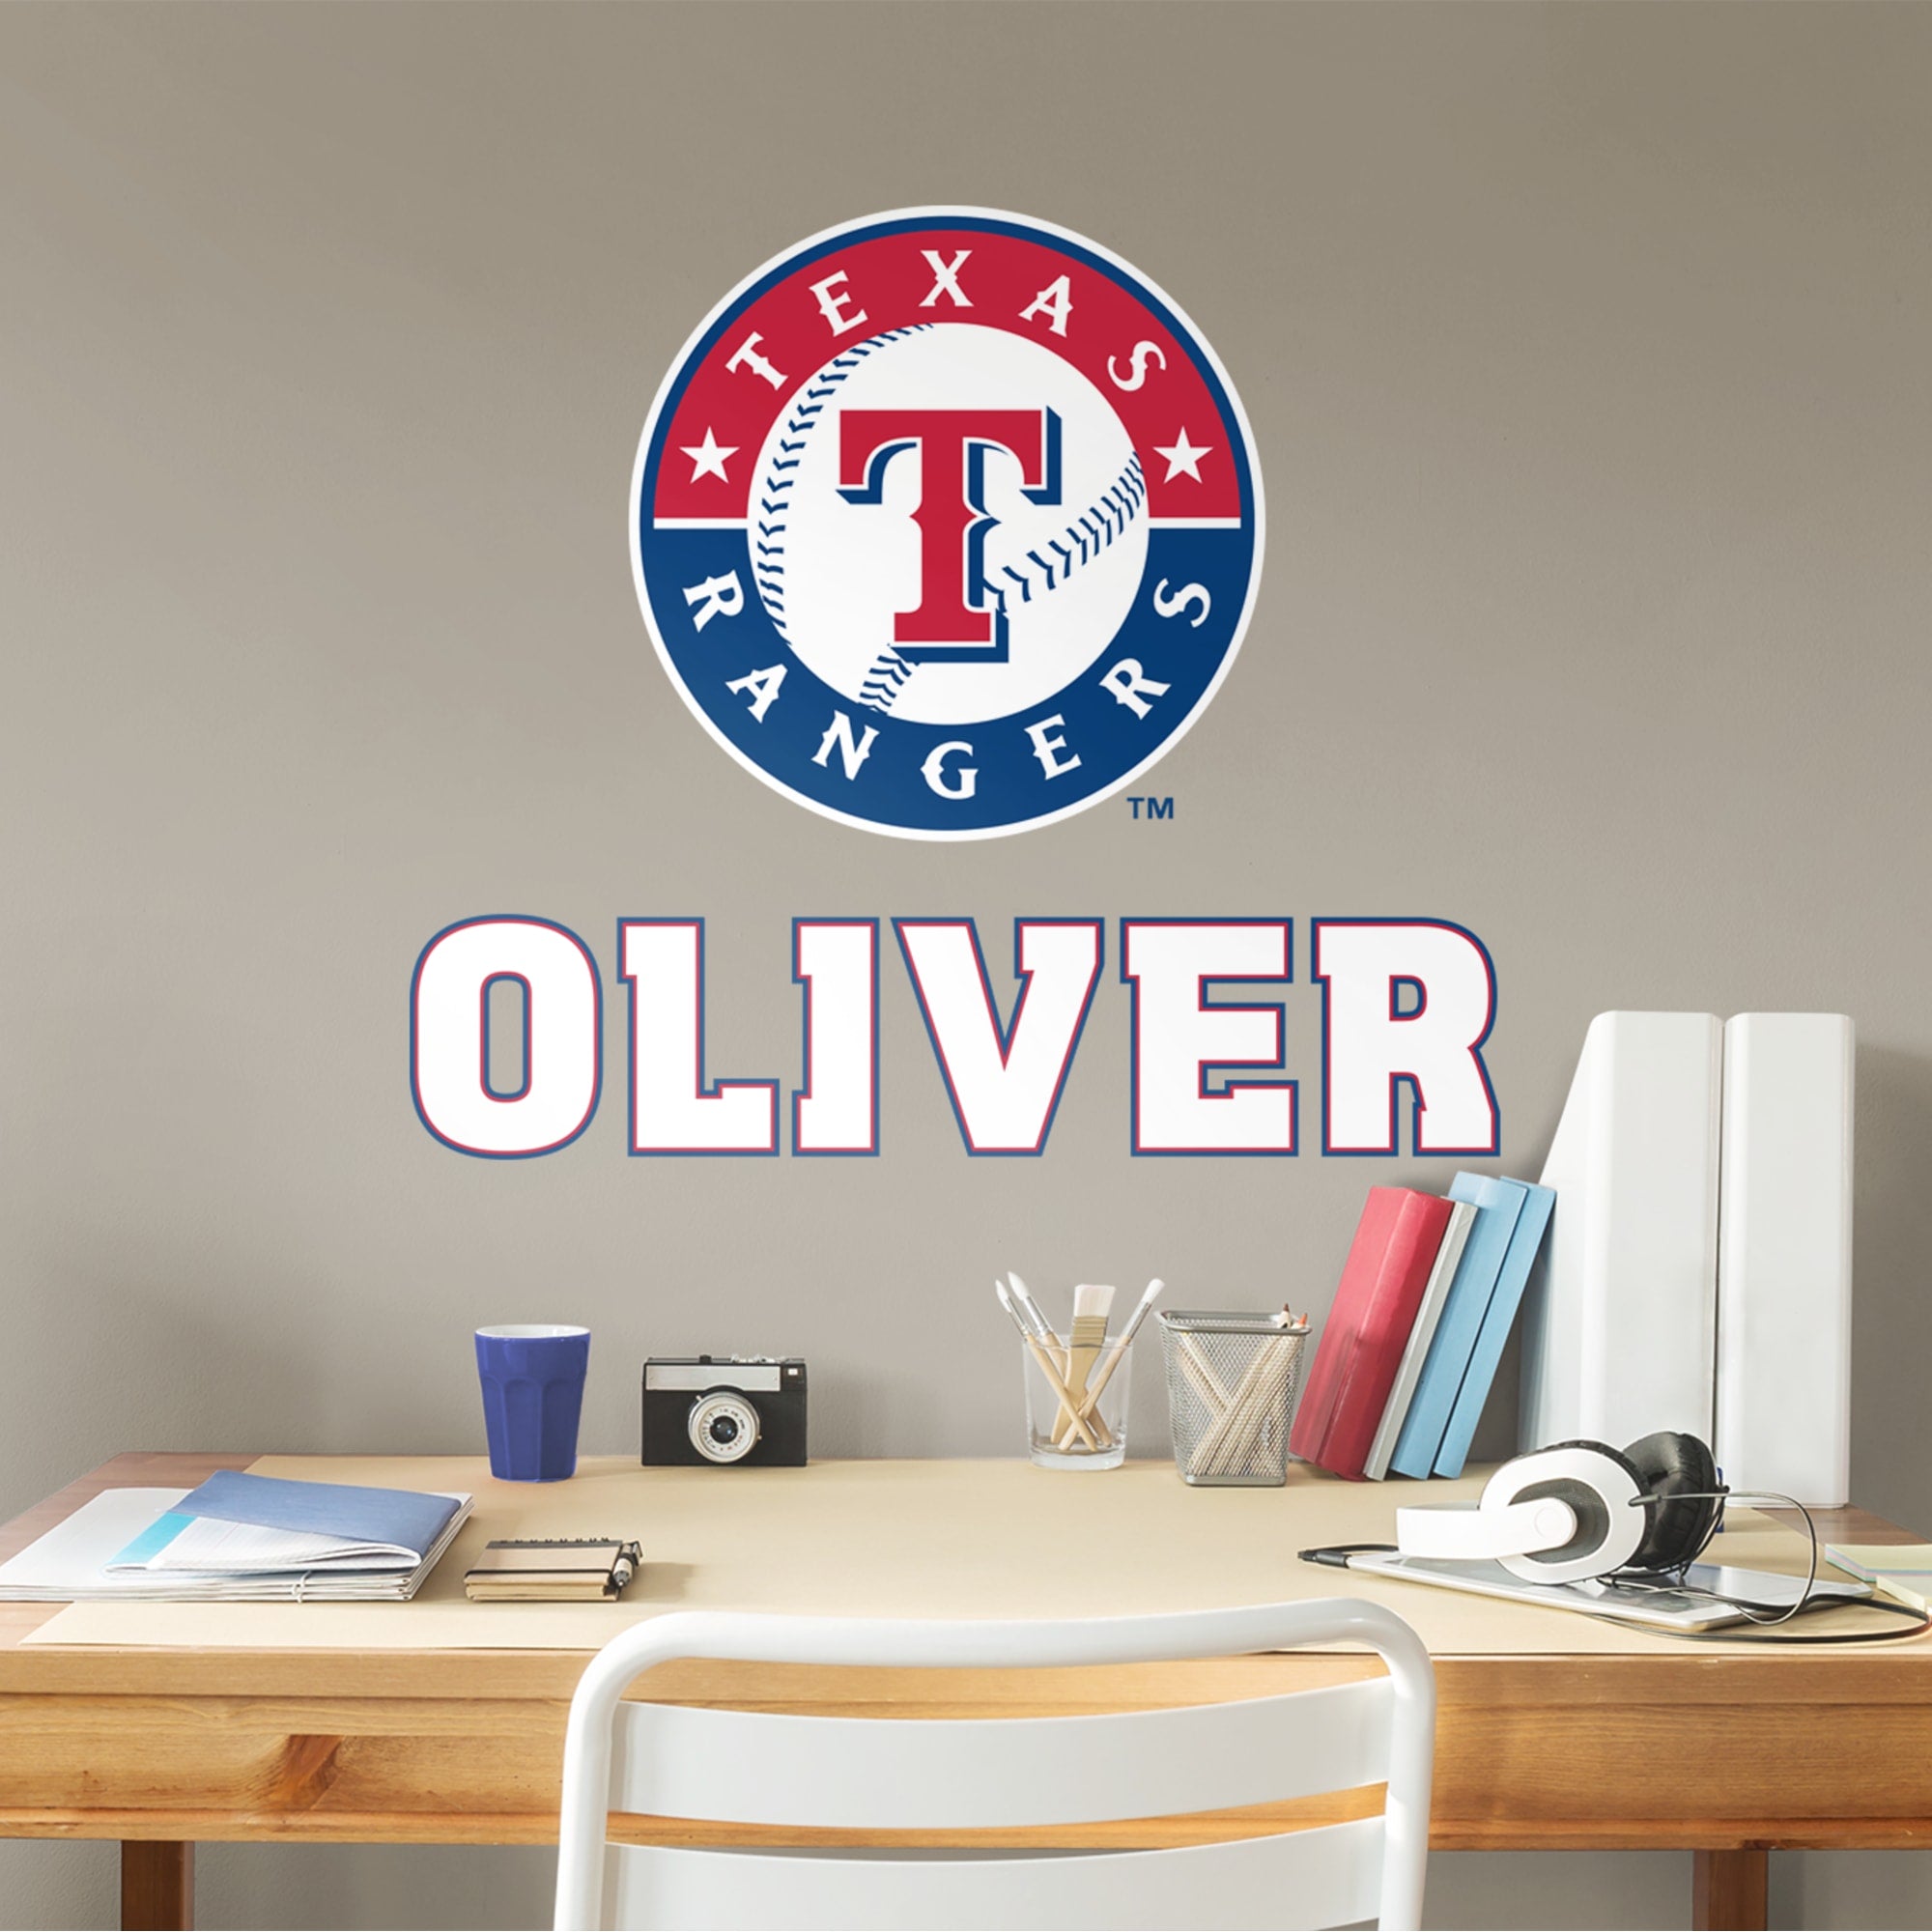 Texas Rangers: Stacked Personalized Name - Officially Licensed MLB Transfer Decal in White (52"W x 39.5"H) by Fathead | Vinyl